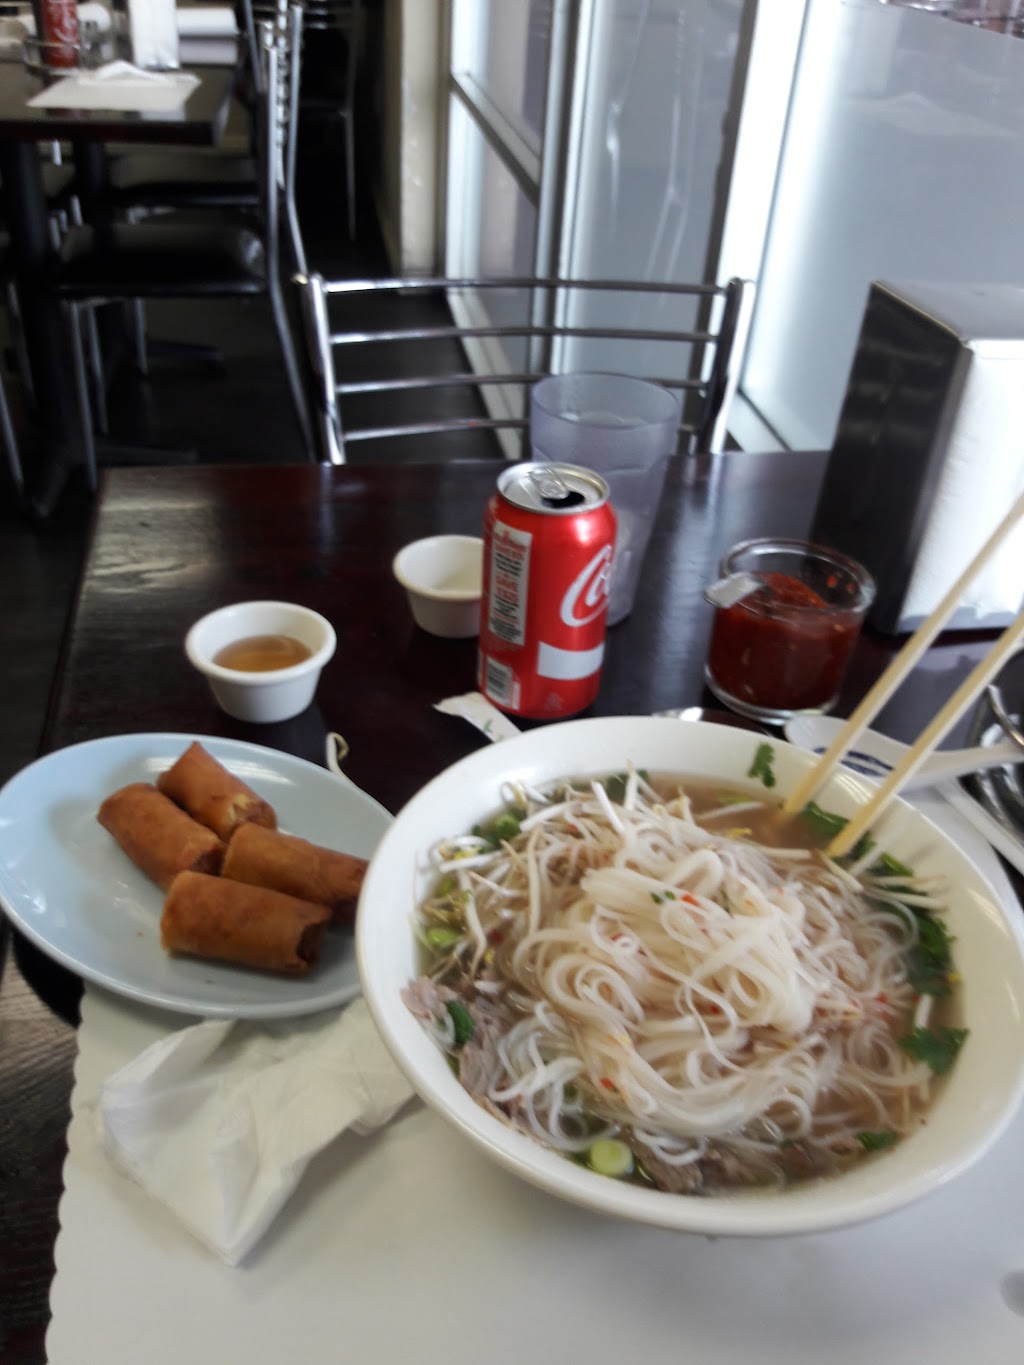 Phở Saigon Noodle & Grill | 1753 S Hill St, Los Angeles, CA 90015, USA | Phone: (213) 746-0746